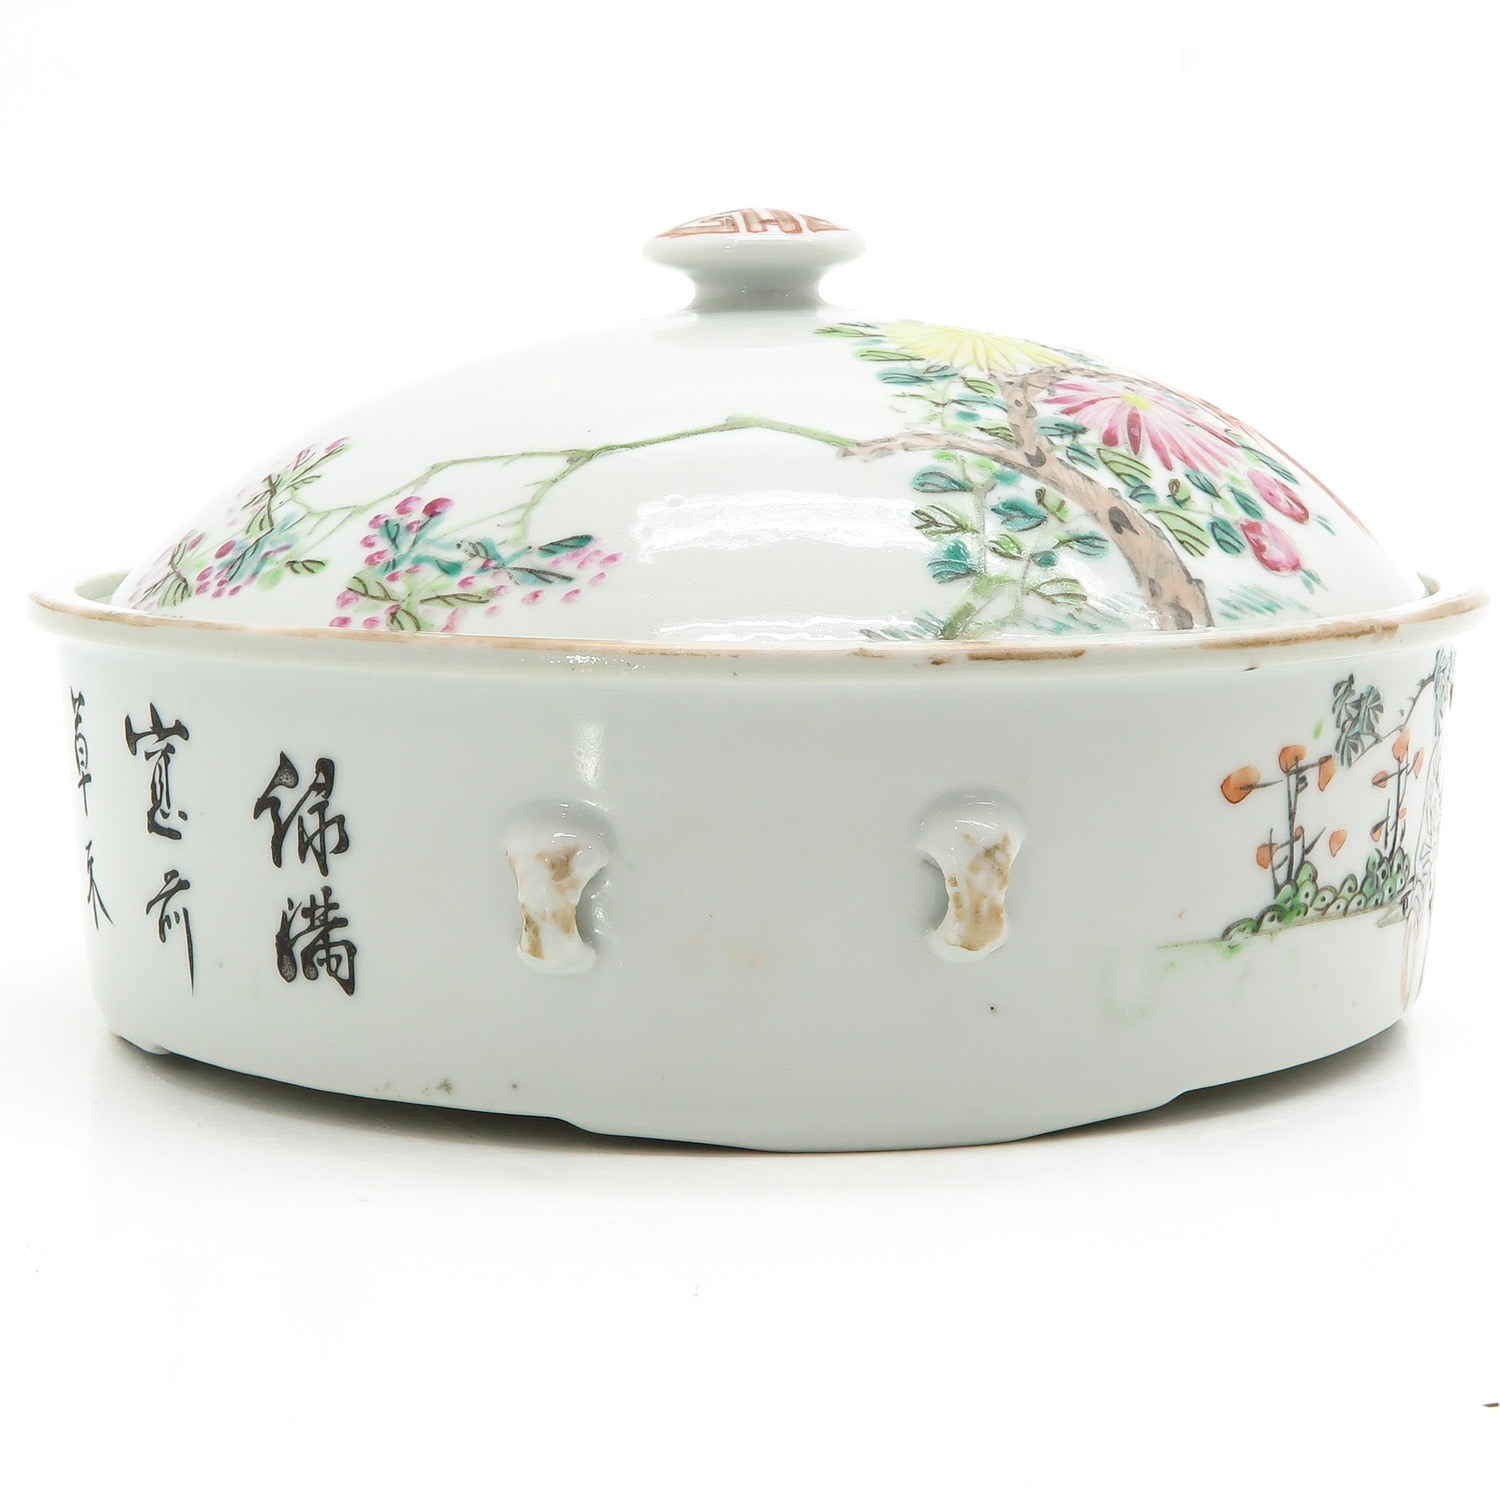 A Serving Dish with Cover - Image 4 of 9